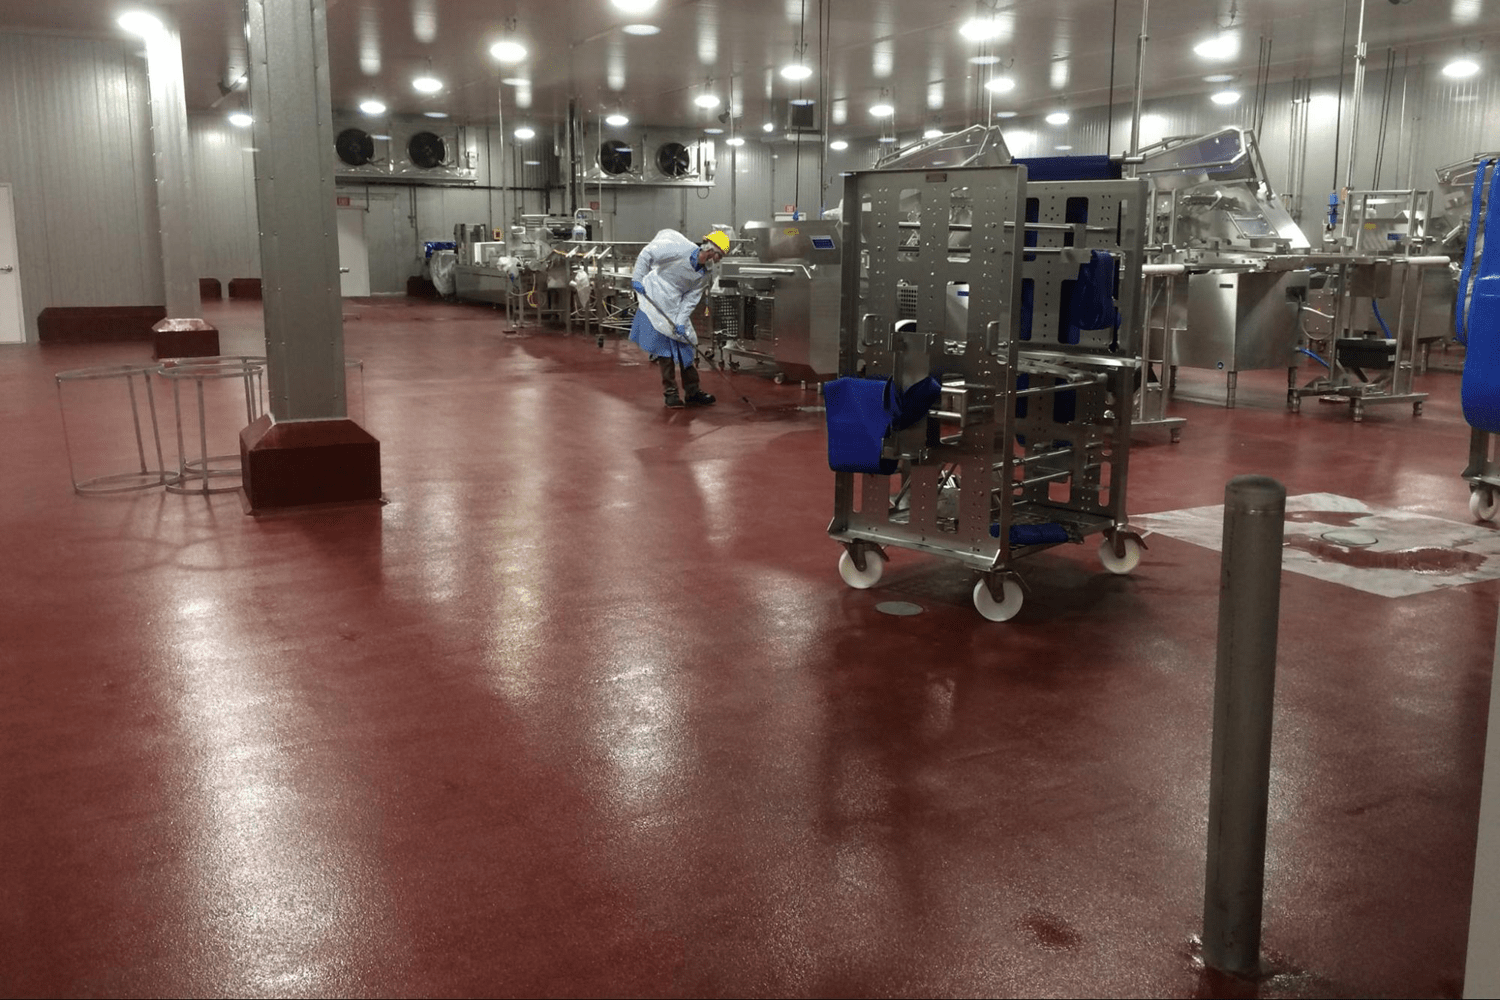 industrial flooring system high performance floor coating system in food and beverage facility